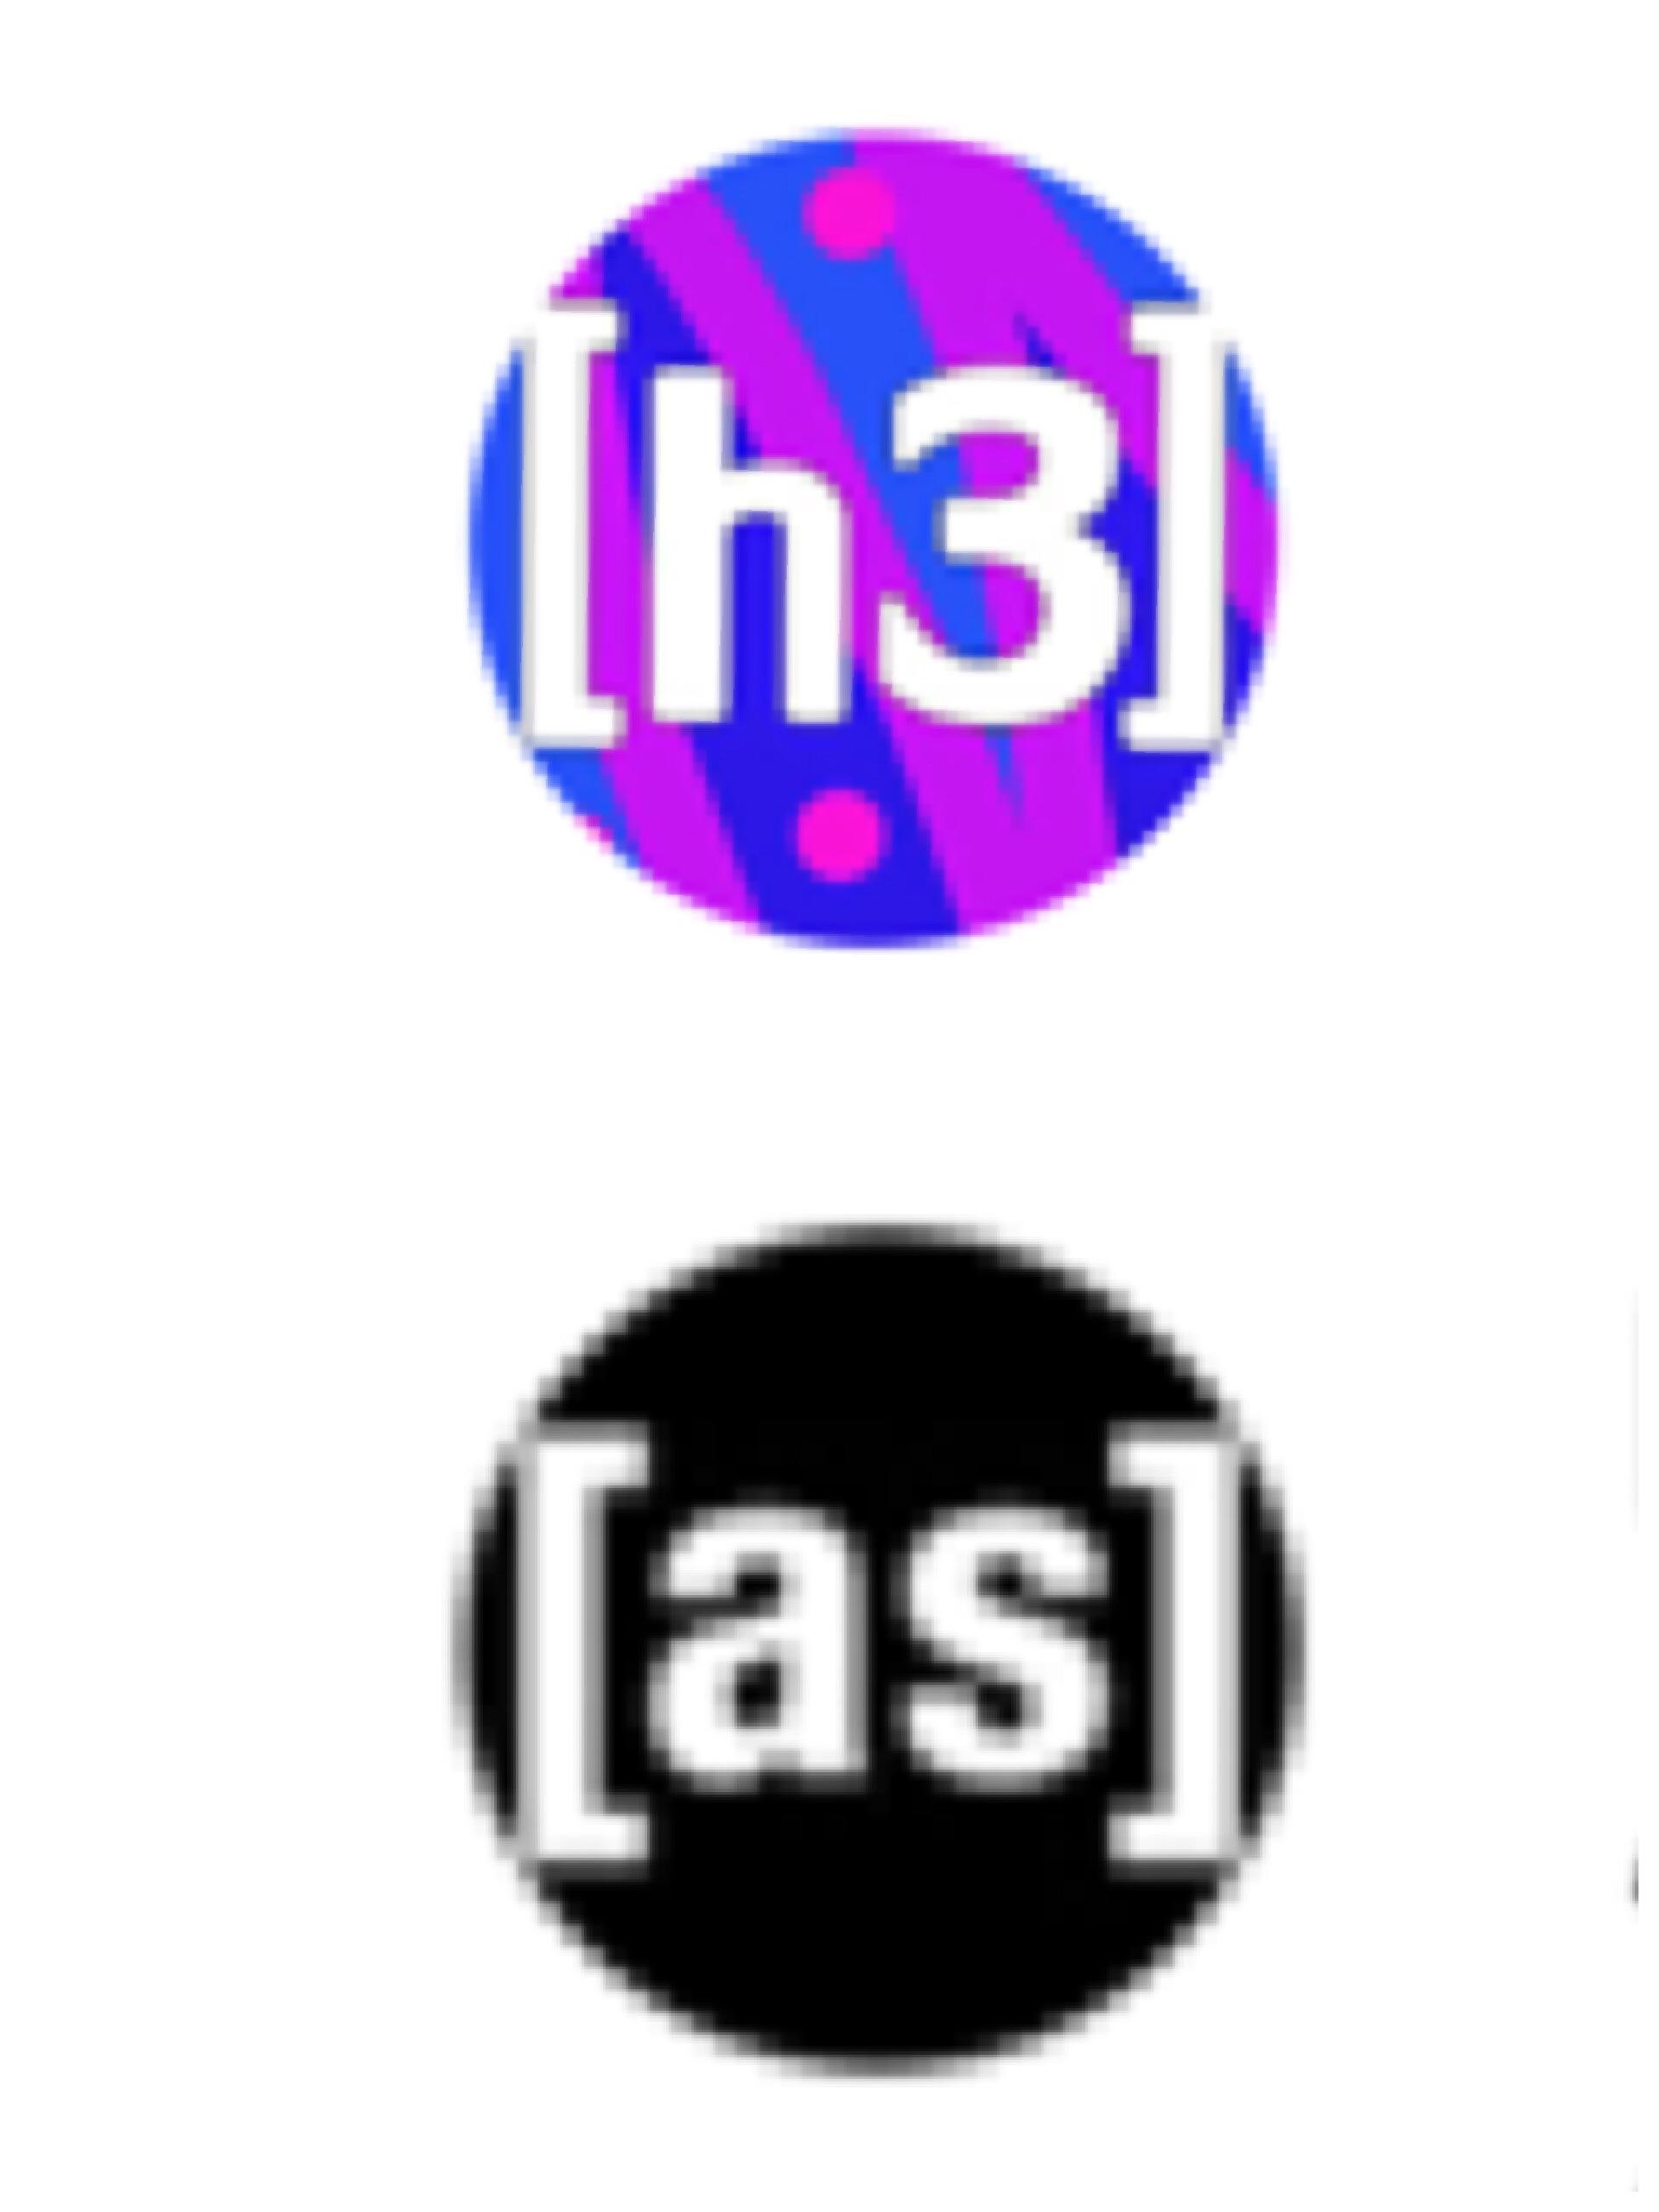 Adult Swim Logo - Anyone noticed h3h3 and adultswim have similar logos? : h3h3productions